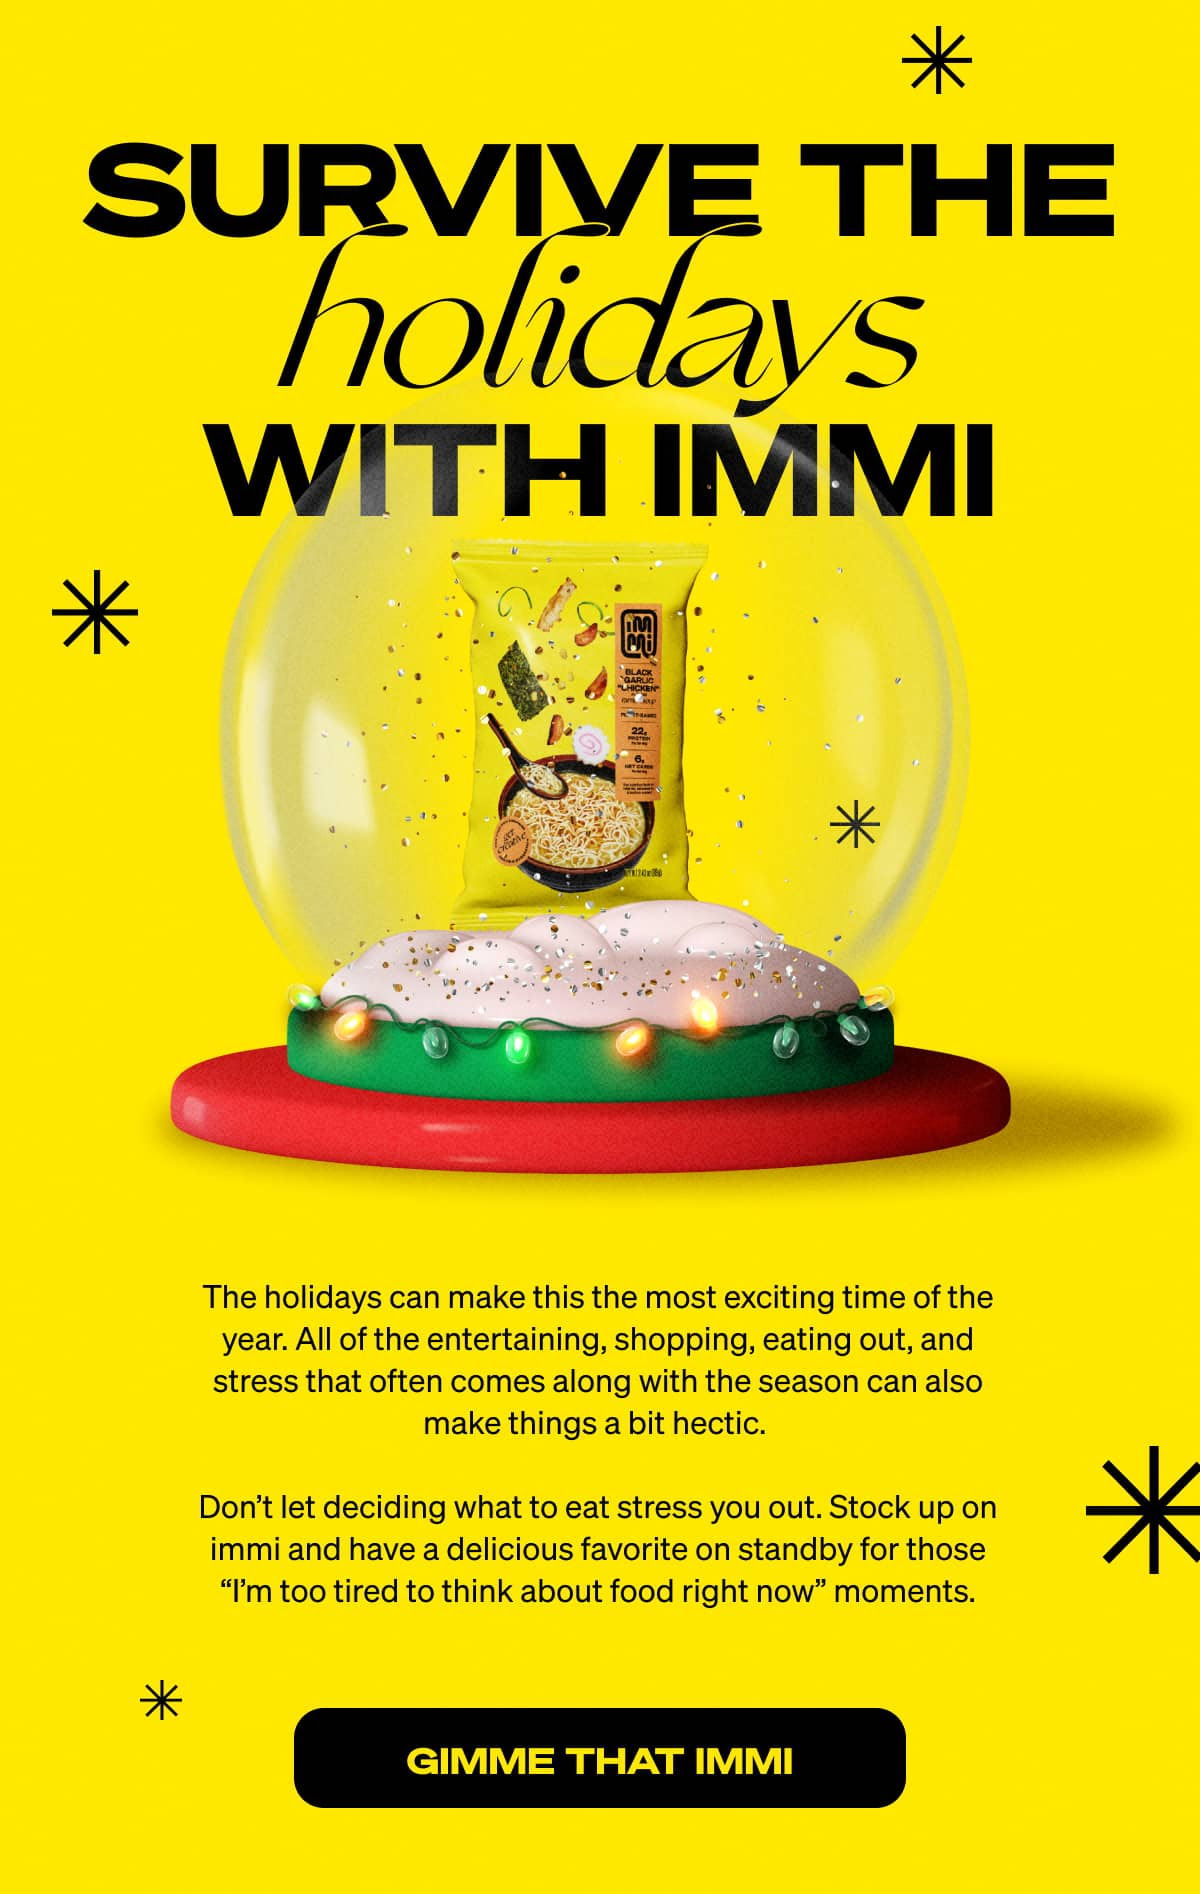 Survive the Holidays with immi